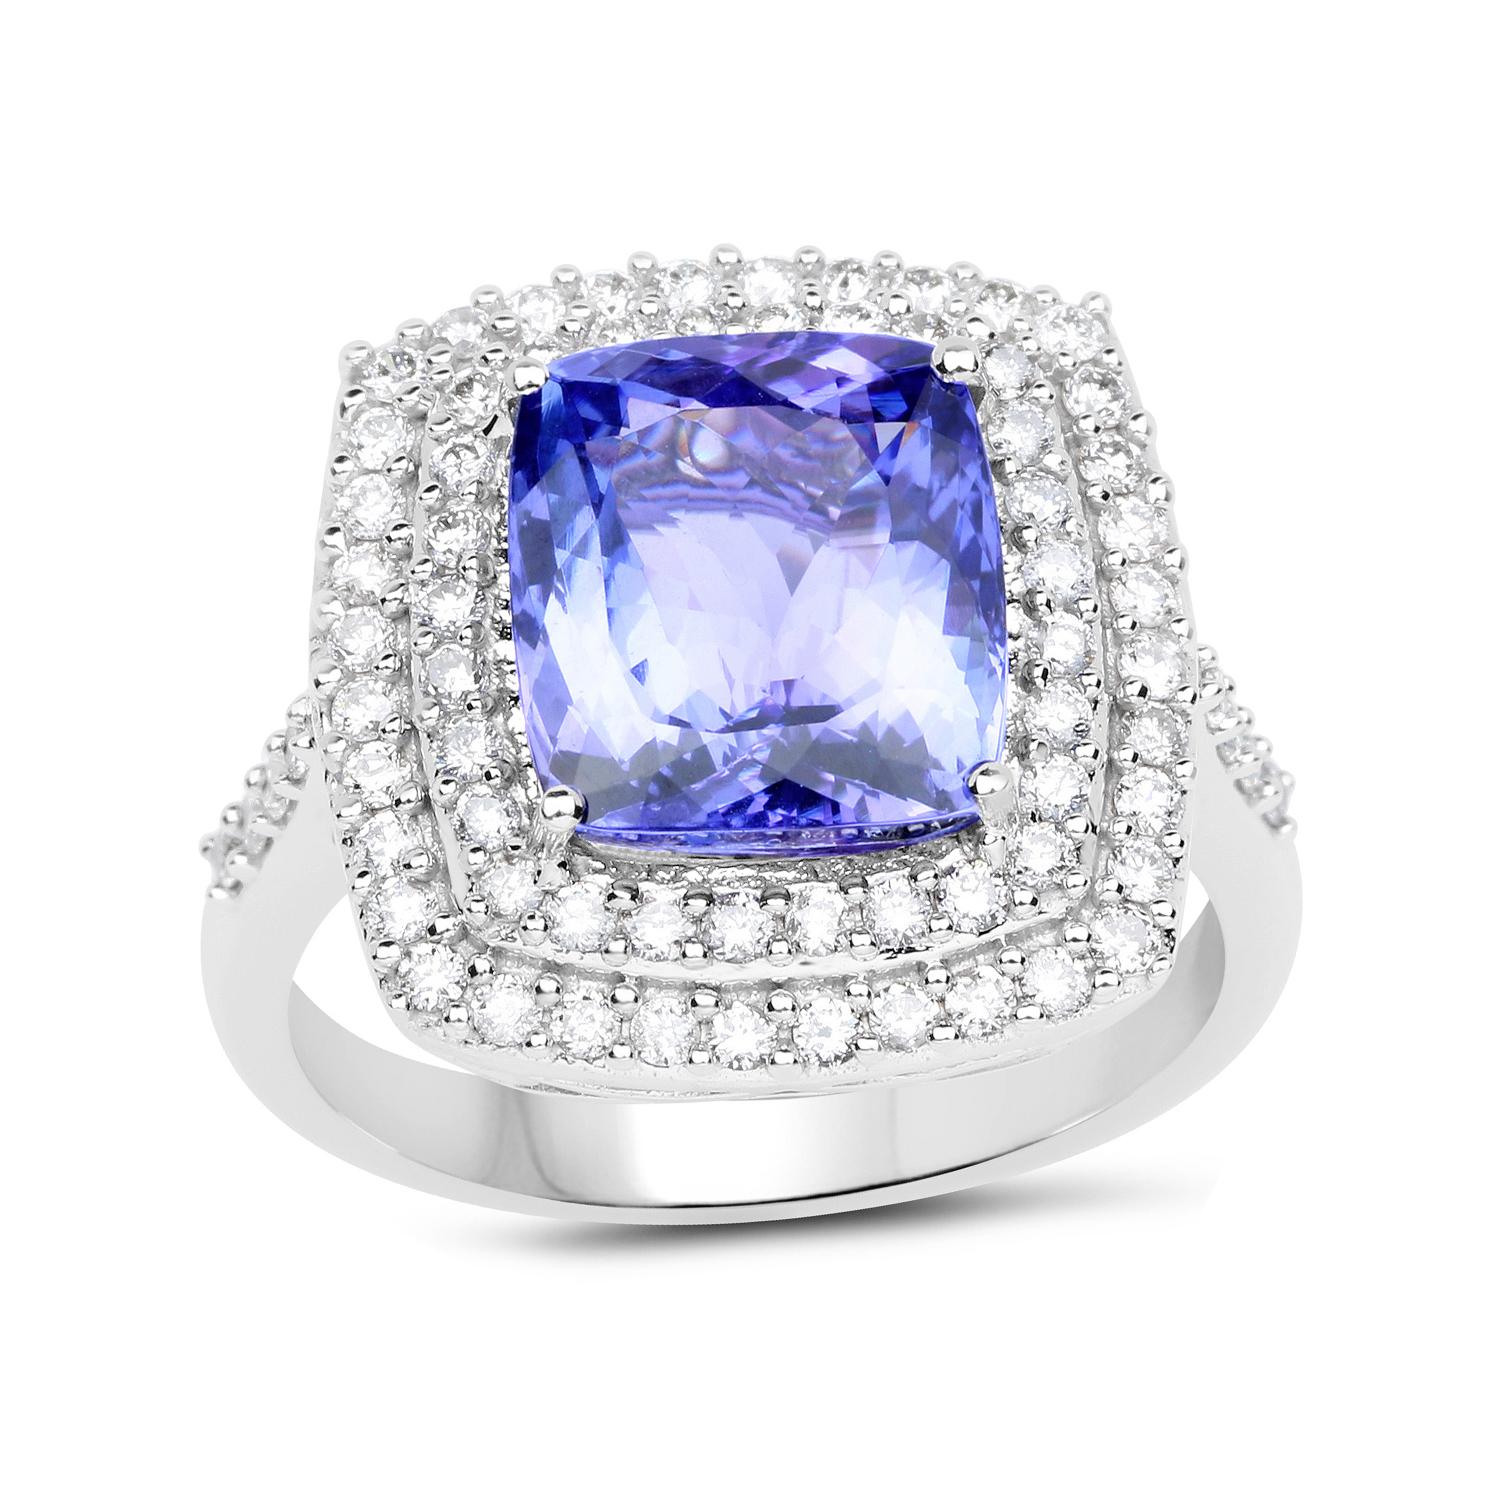 4.94 Carat Tanzanite and Diamond 14 Karat White Gold Cocktail Ring In New Condition For Sale In Great Neck, NY